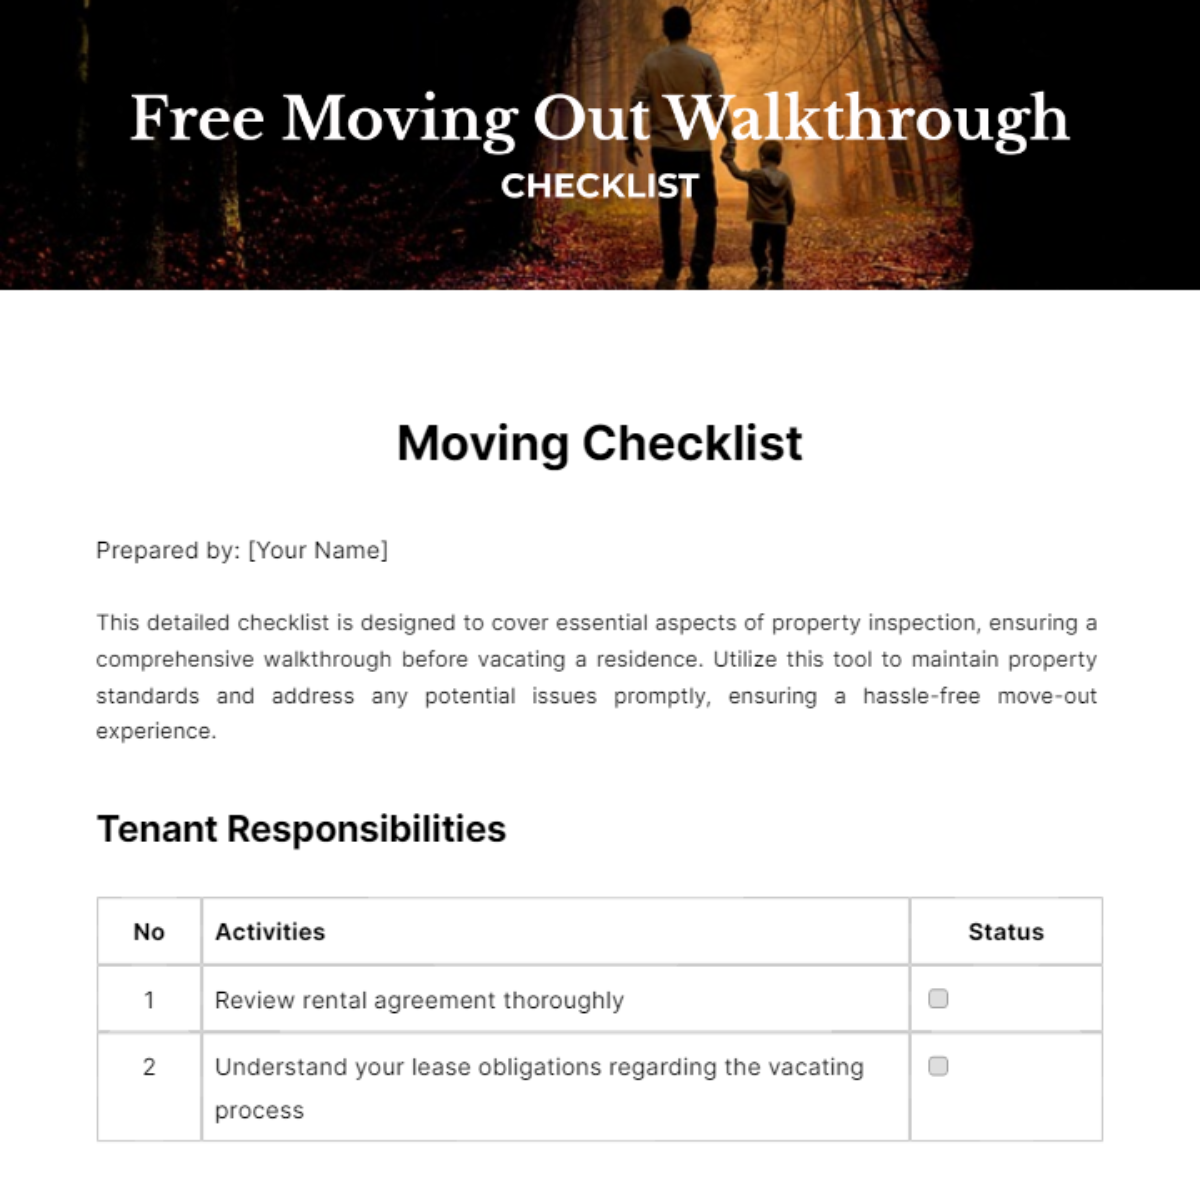 Moving Out Walkthrough Checklist Template